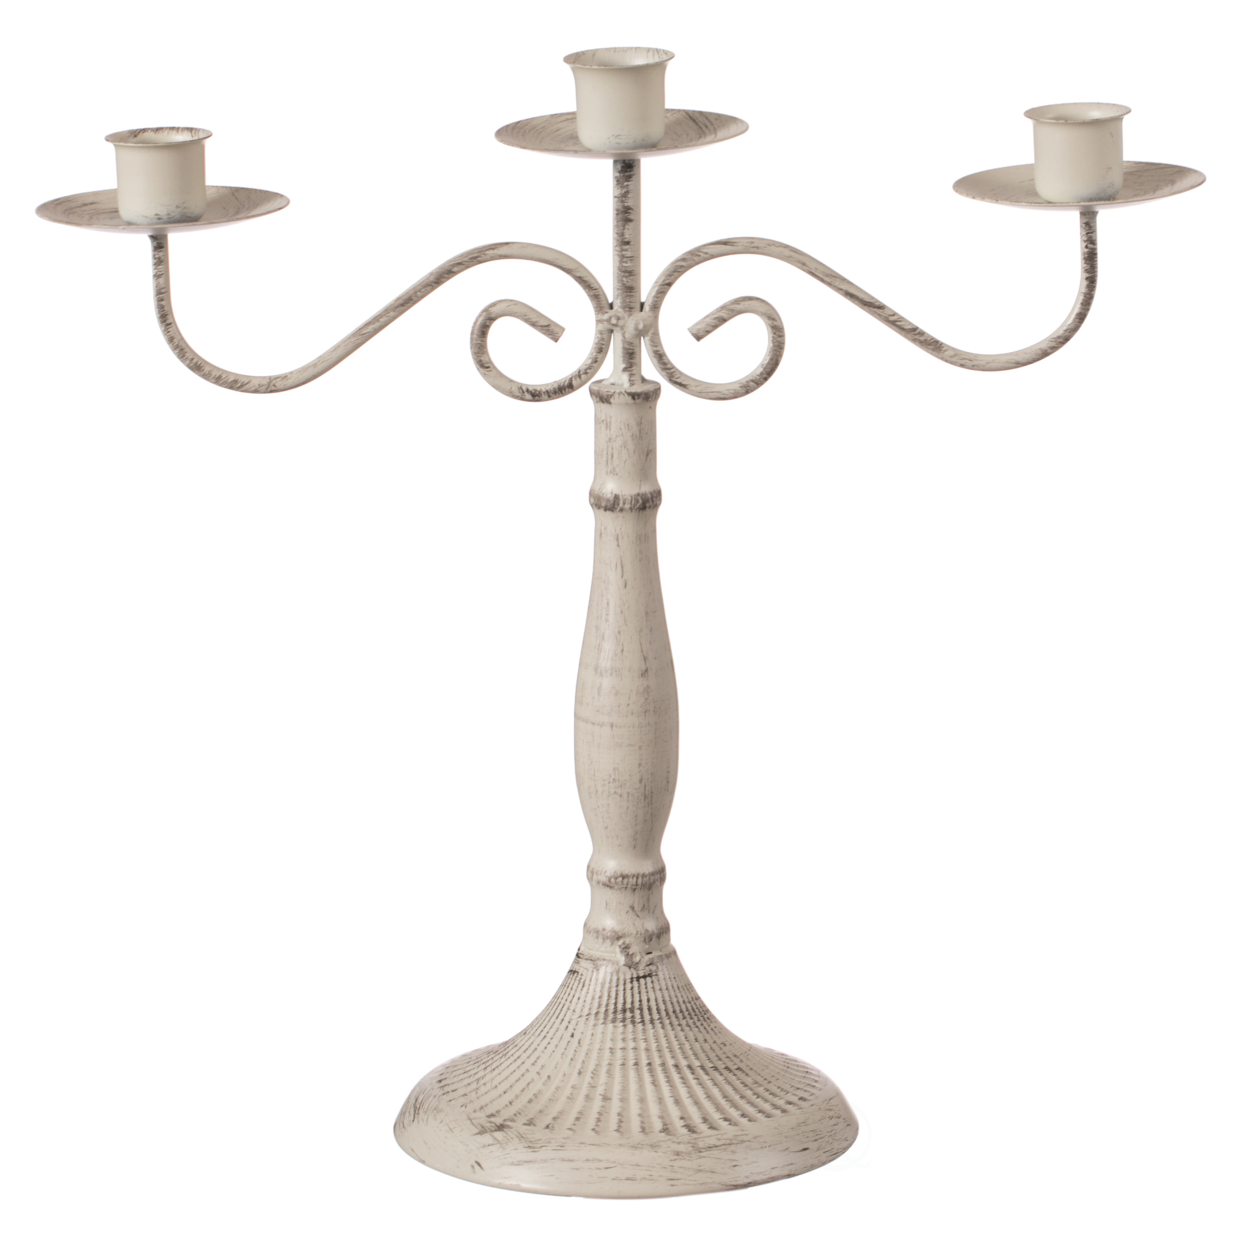 Antique Distressed Metal Candelabra and Candlestick for Dining Room, Entryway, Kitchen and Vanity - Three Arm